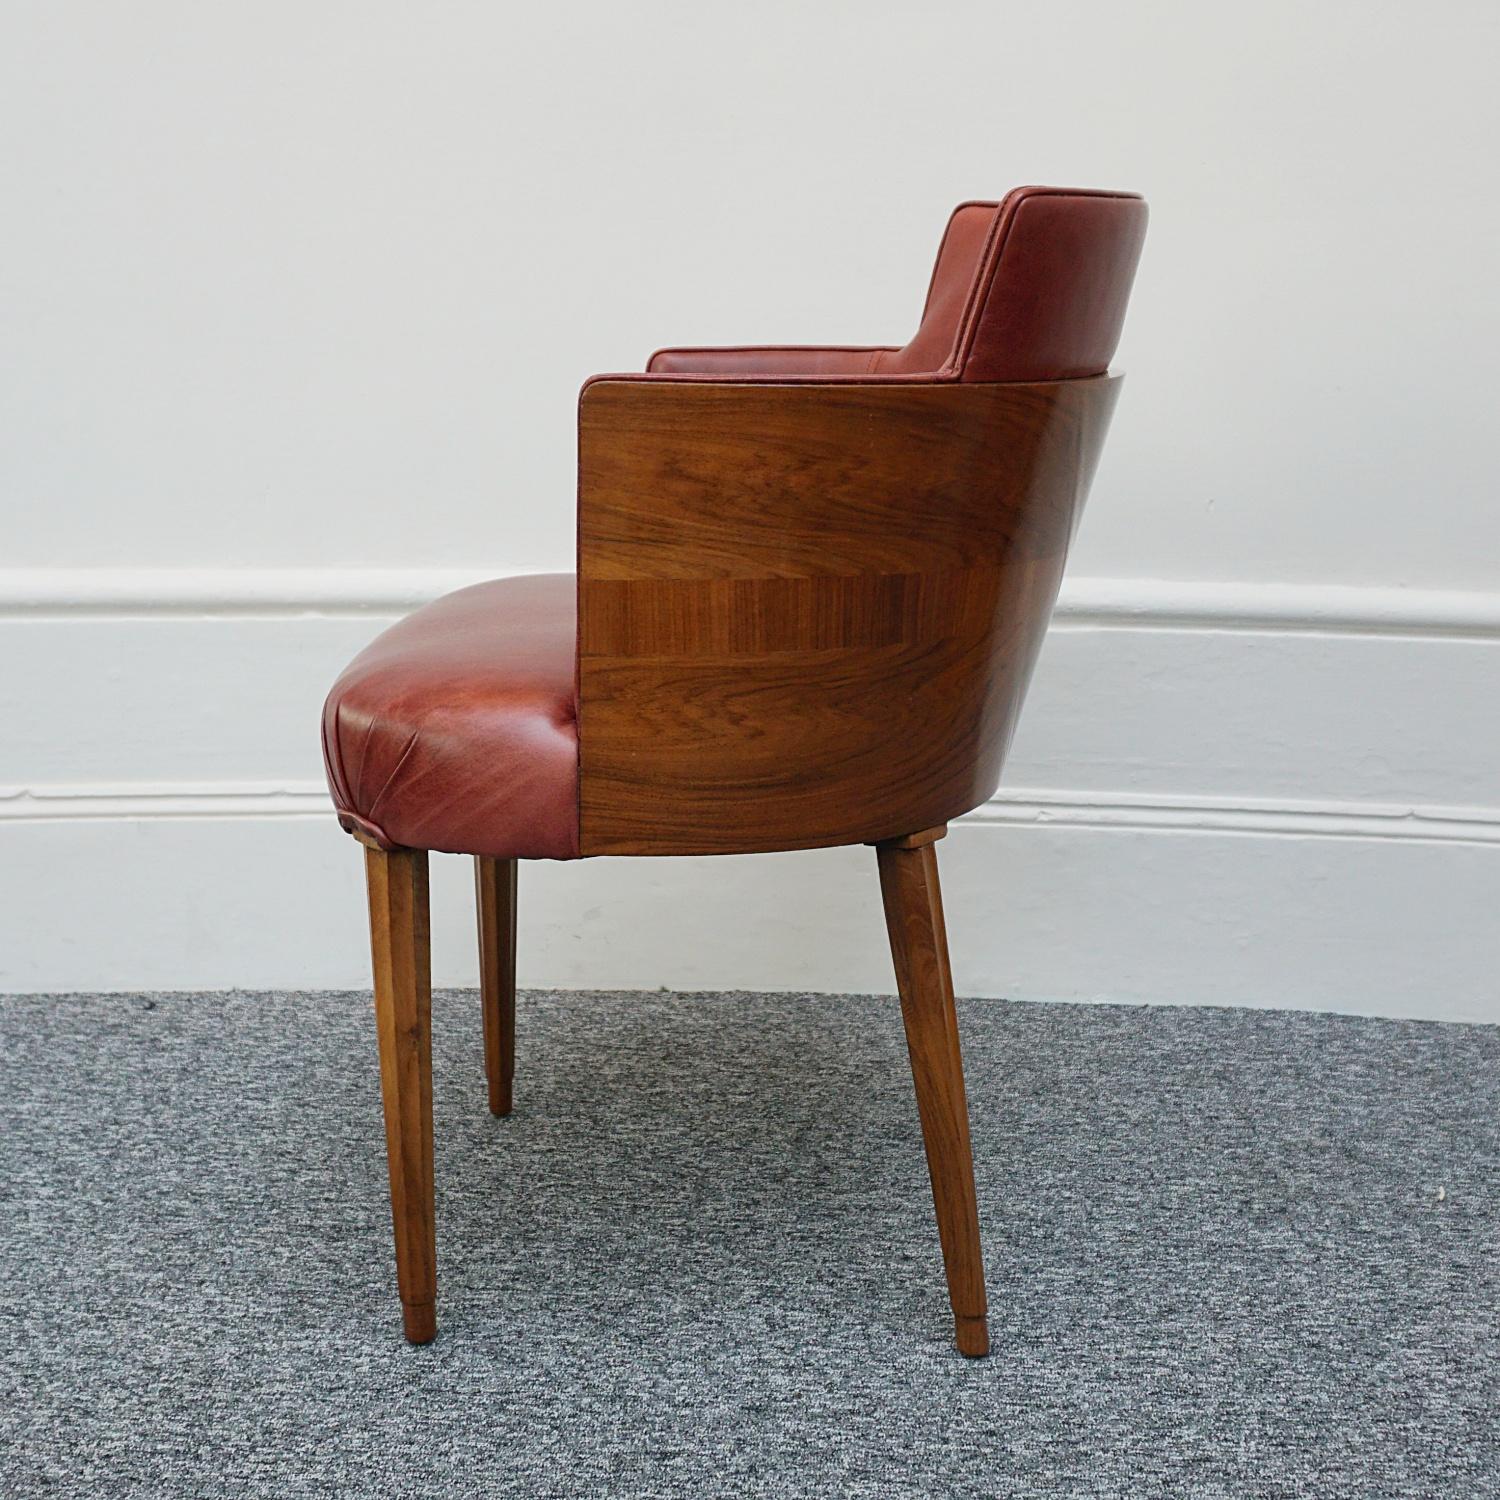 Mid-20th Century Art Deco Tub/ Desk Chair Reupholstered in Red Leather